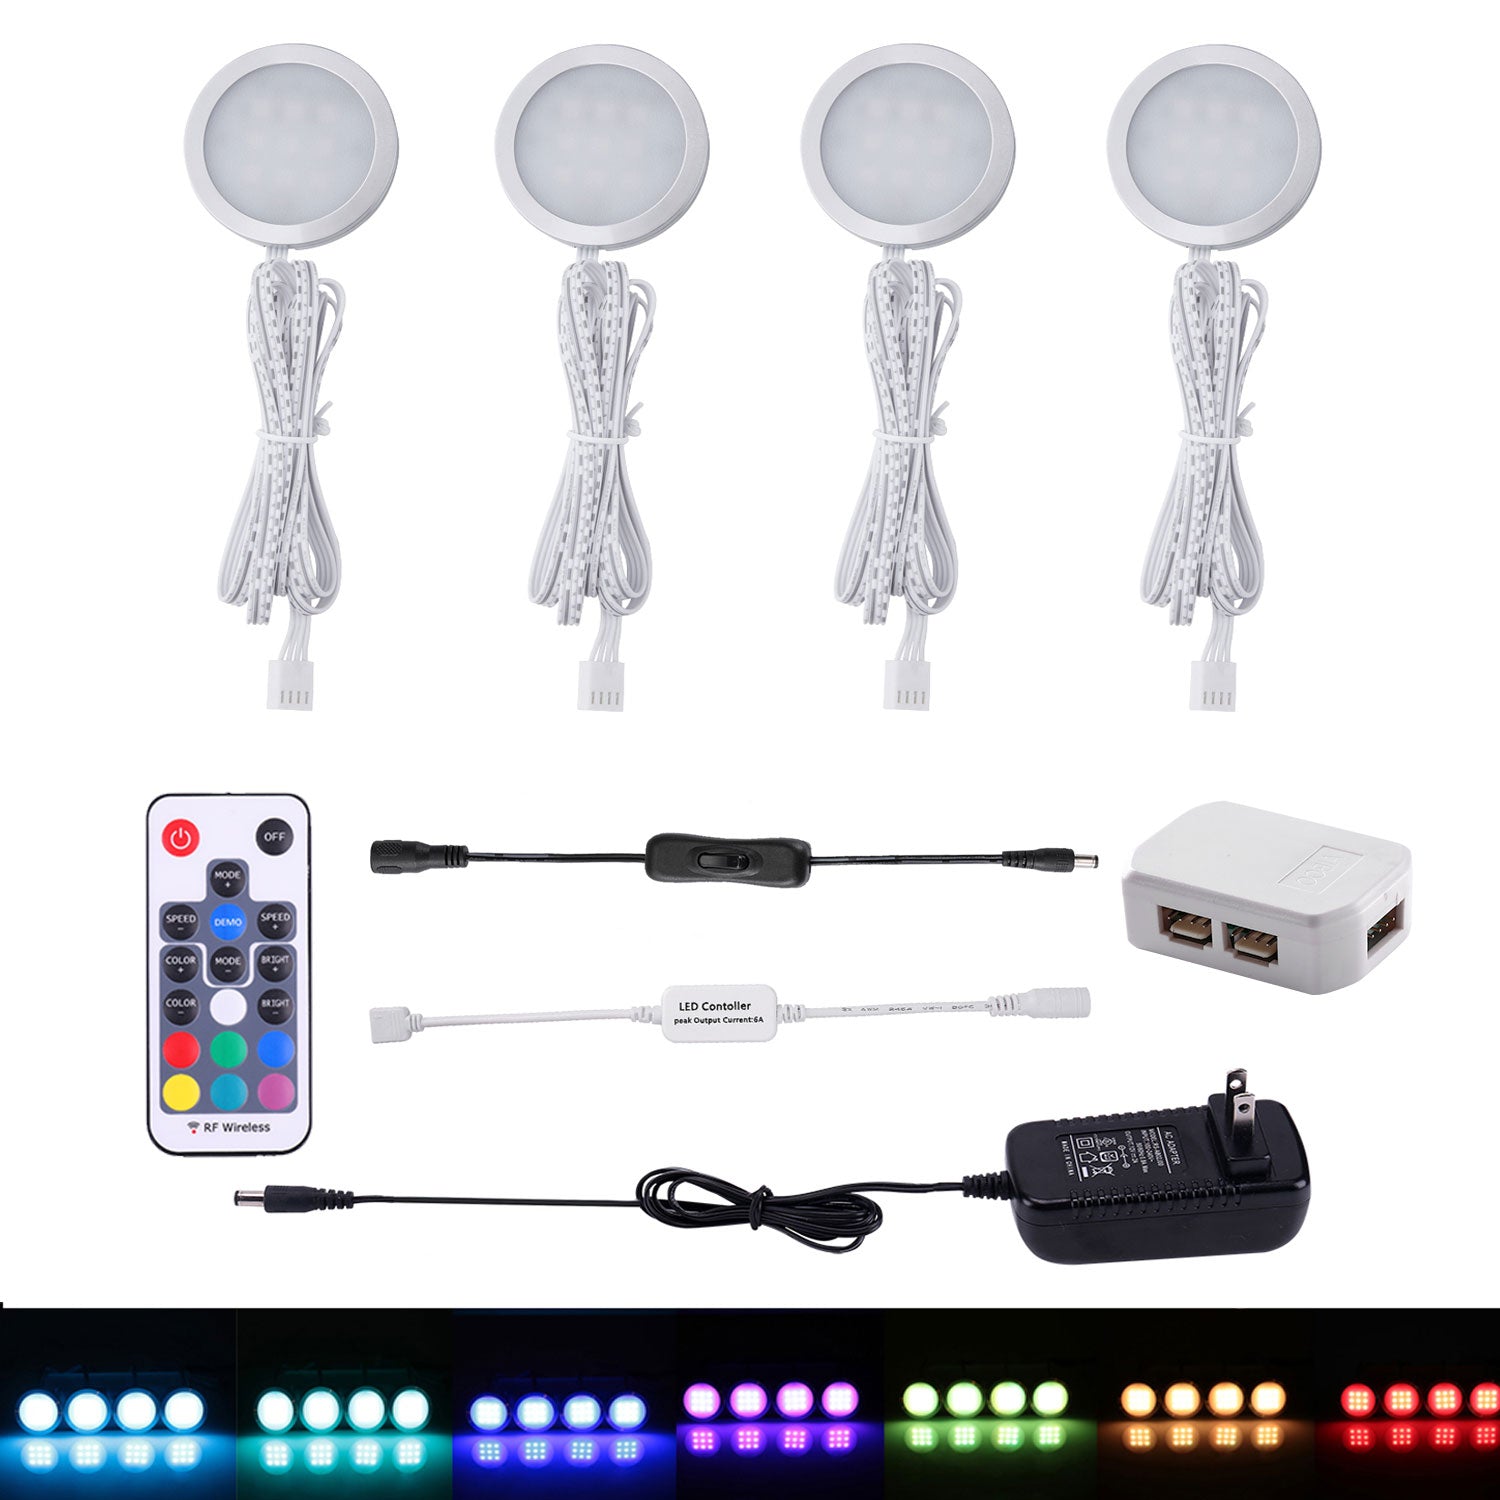 AIBOO RGB Color Changing LED Under Cabinet Lights Kit Aluminum Slim Puck Lamps for Kitchen Counter Wardrobe Counter Furniture Ambiance Christmas Decor Lighting (4 lights)